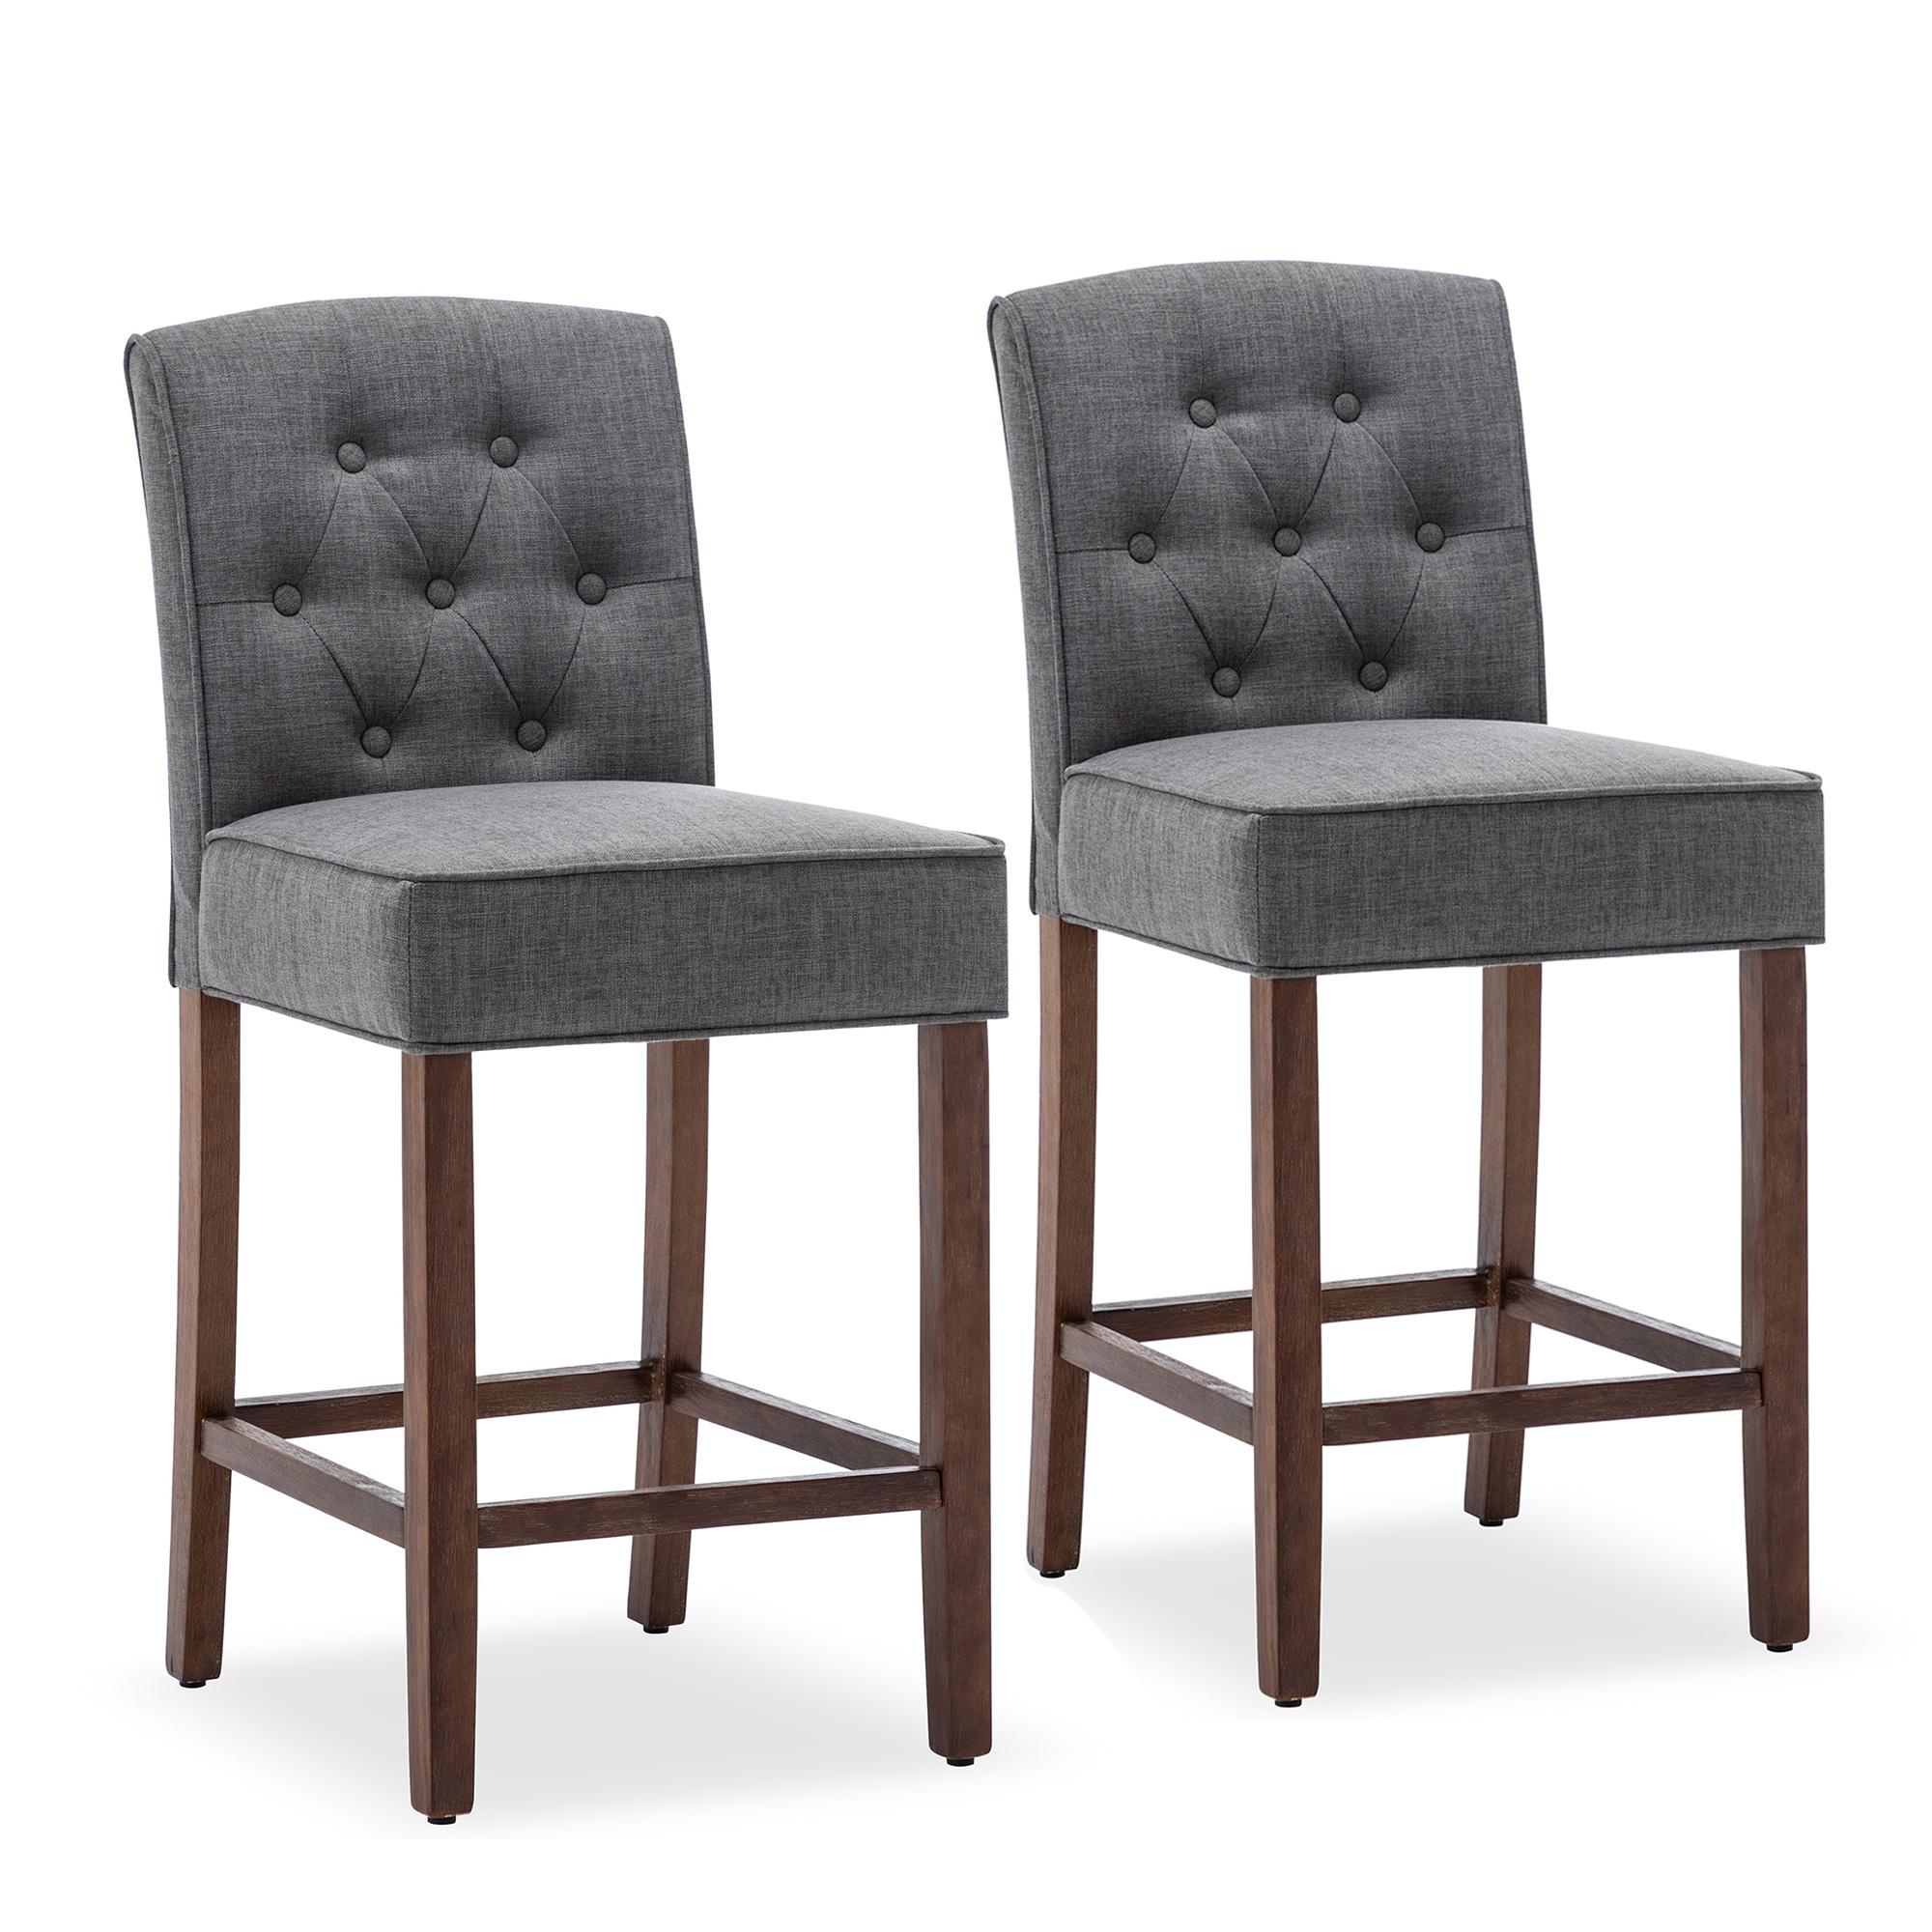 Gray BELLEZE 40 Tufted Wingback Fabric Upholstered Counter Stools Dining Chair Set of 2